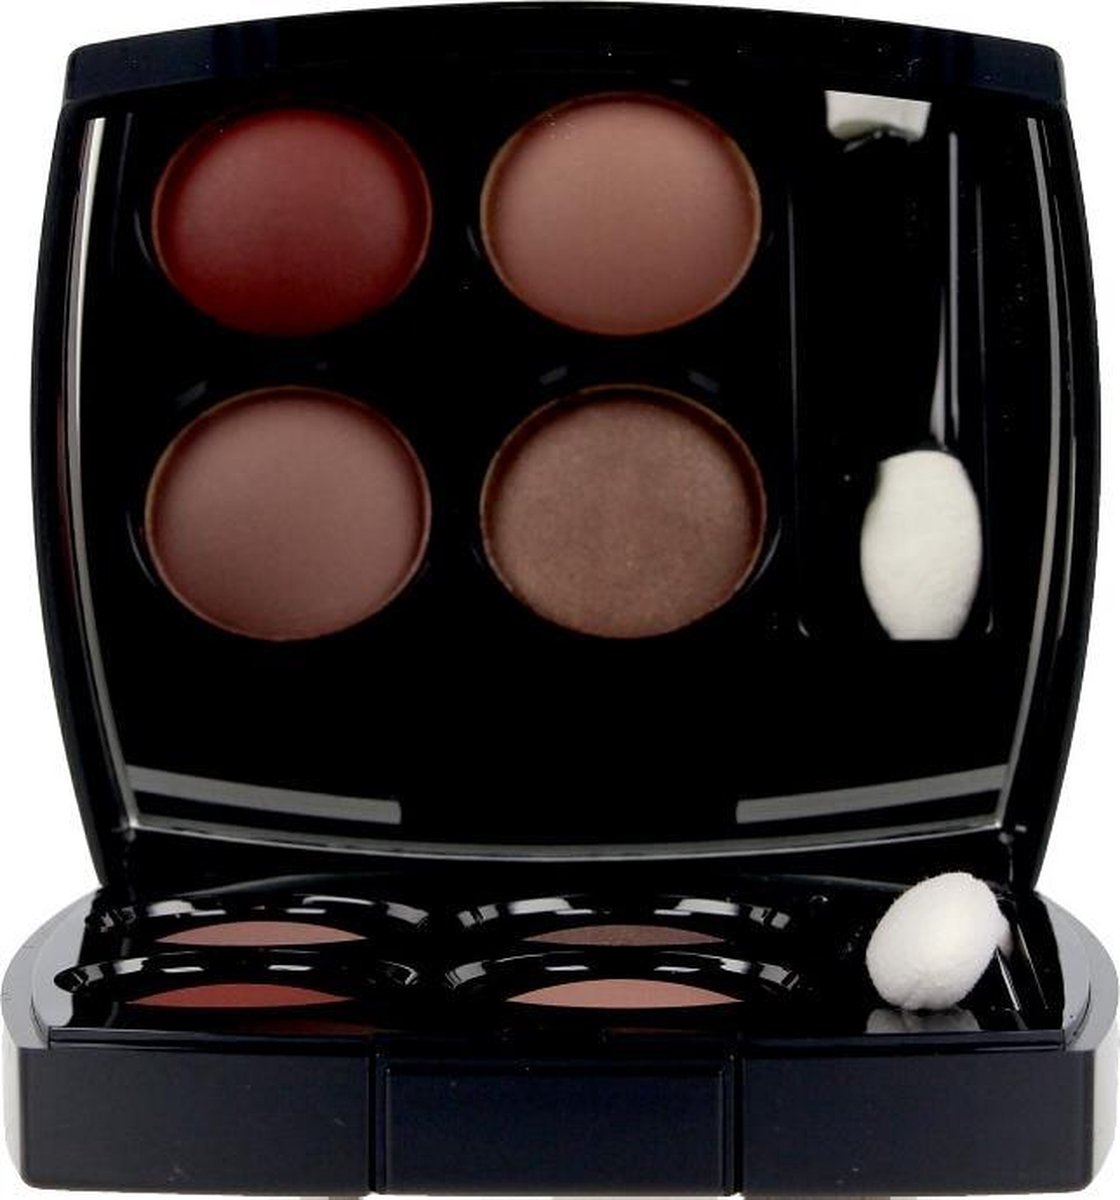 Chanel Les 4 Ombres Multieffect Quadra Eyeshadow 328 Blurry Mauve 2G: Buy  Online at Best Price in UAE 